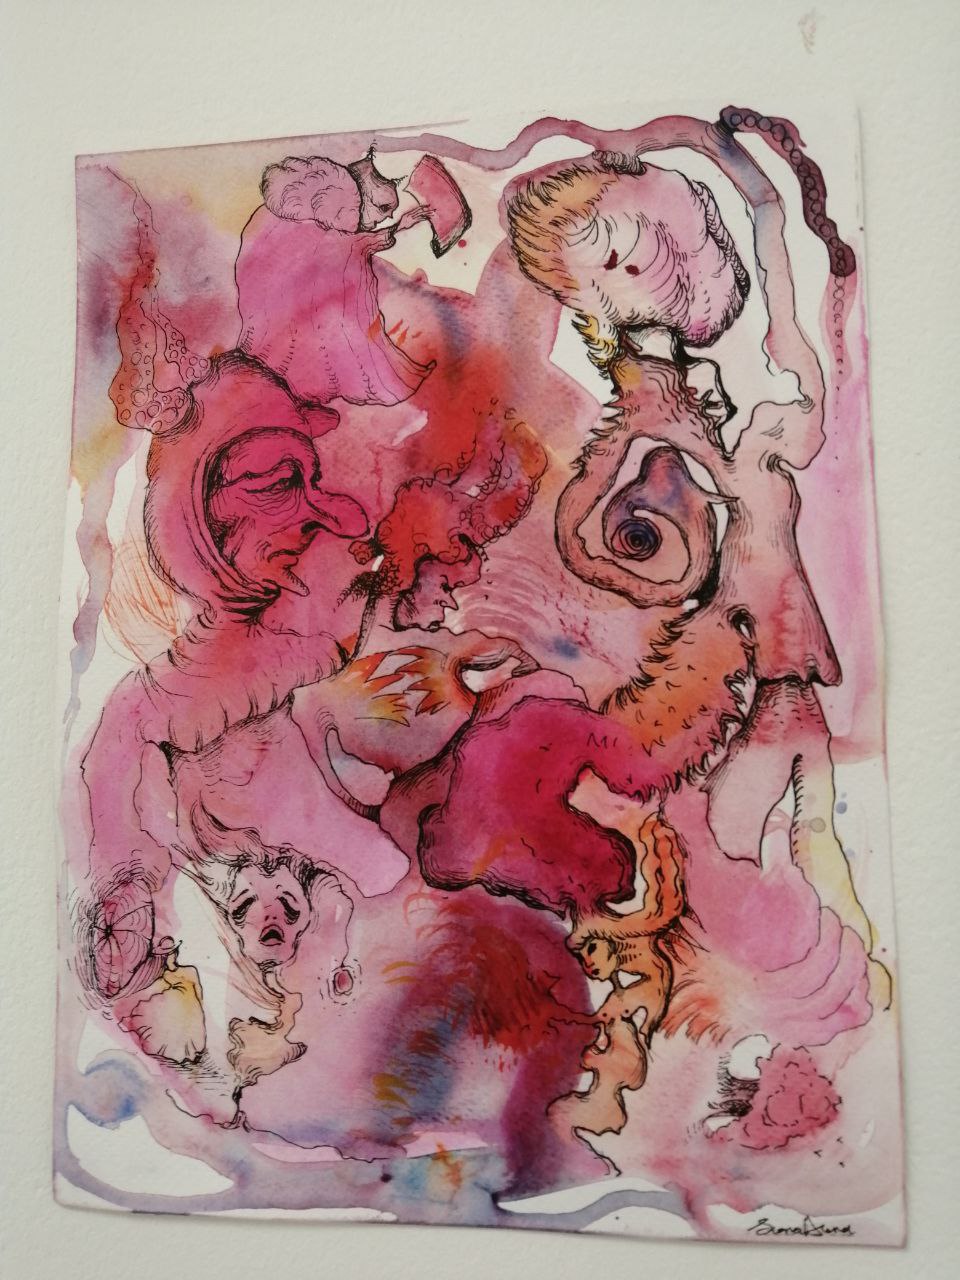 An abstract watercolour drawing on paper.